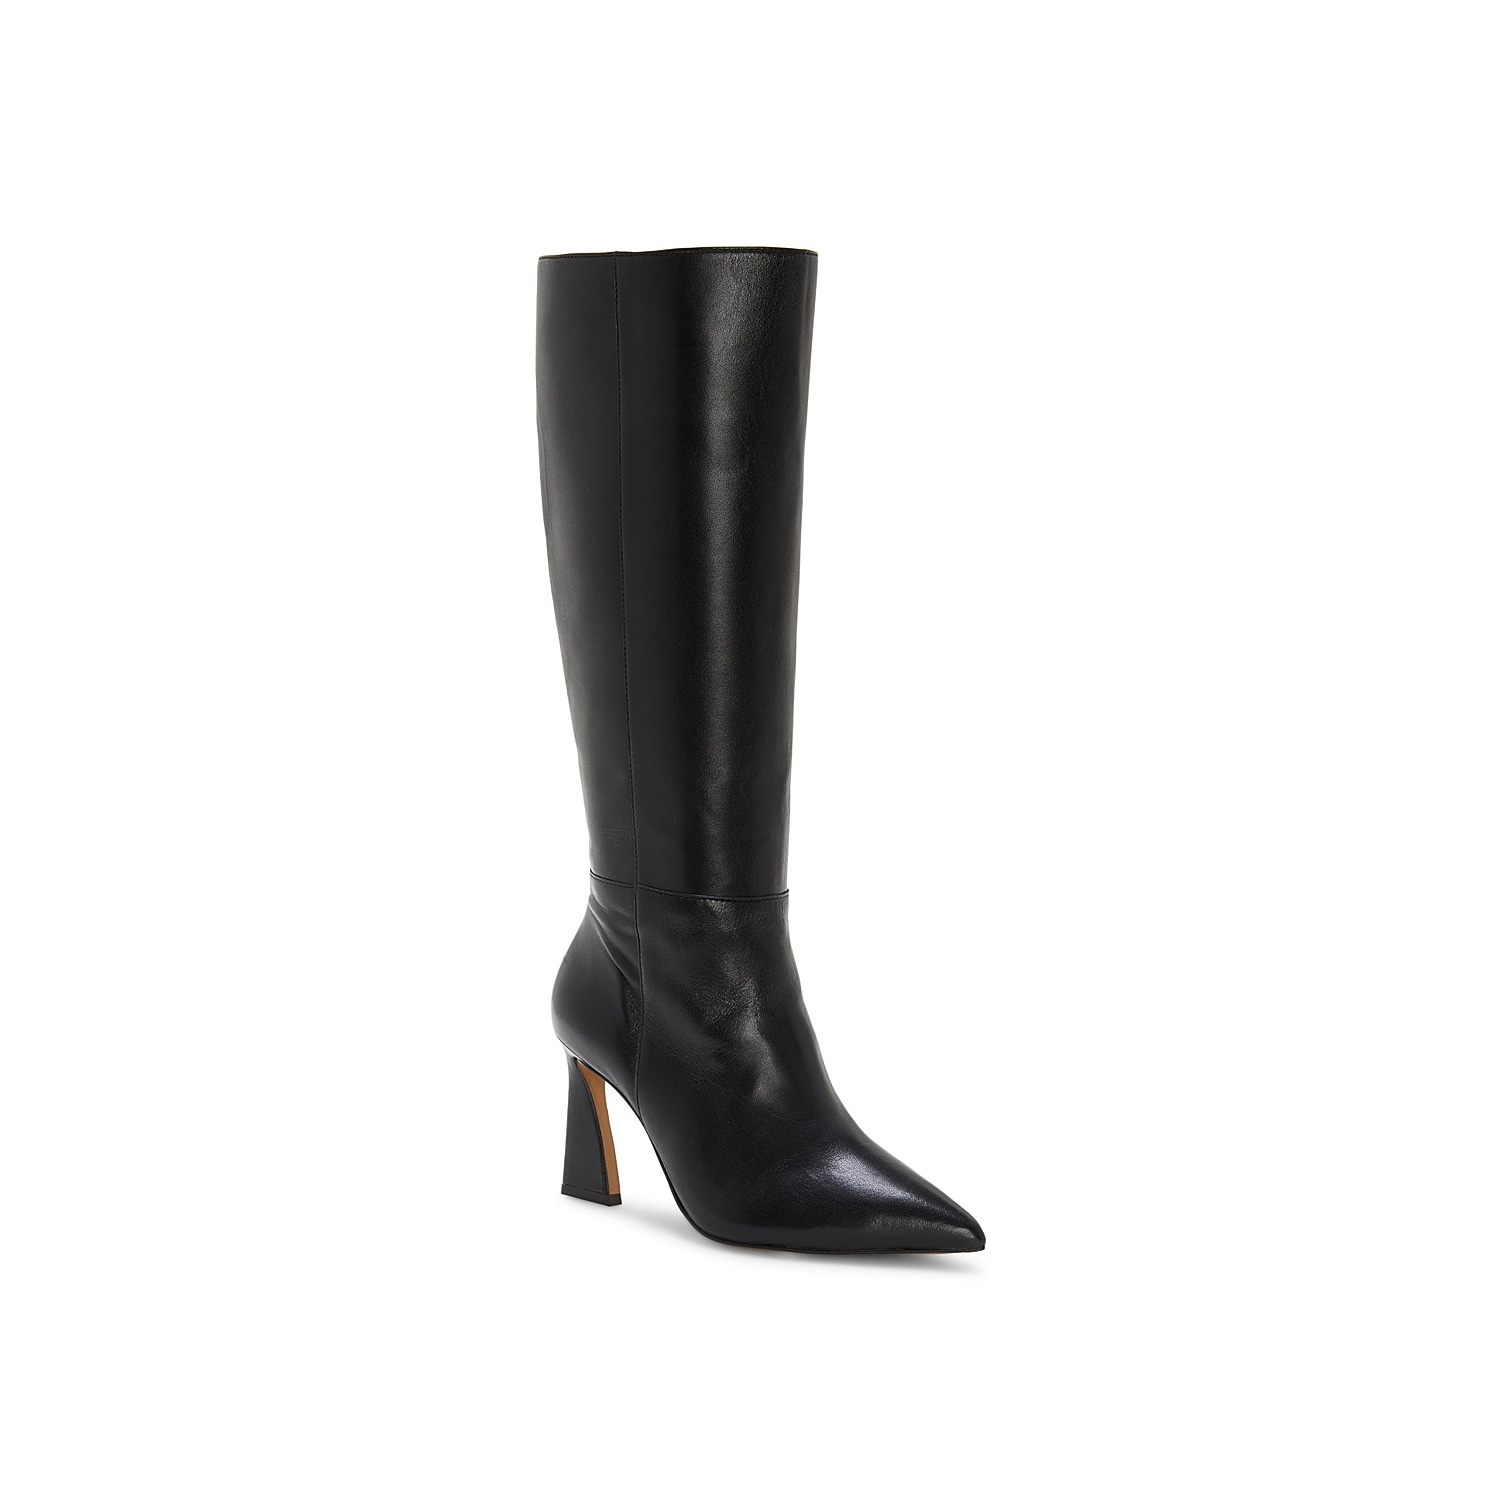 Vince Camuto Tressara Boot | Women's | Black Leather | Size 6.5 | Boots